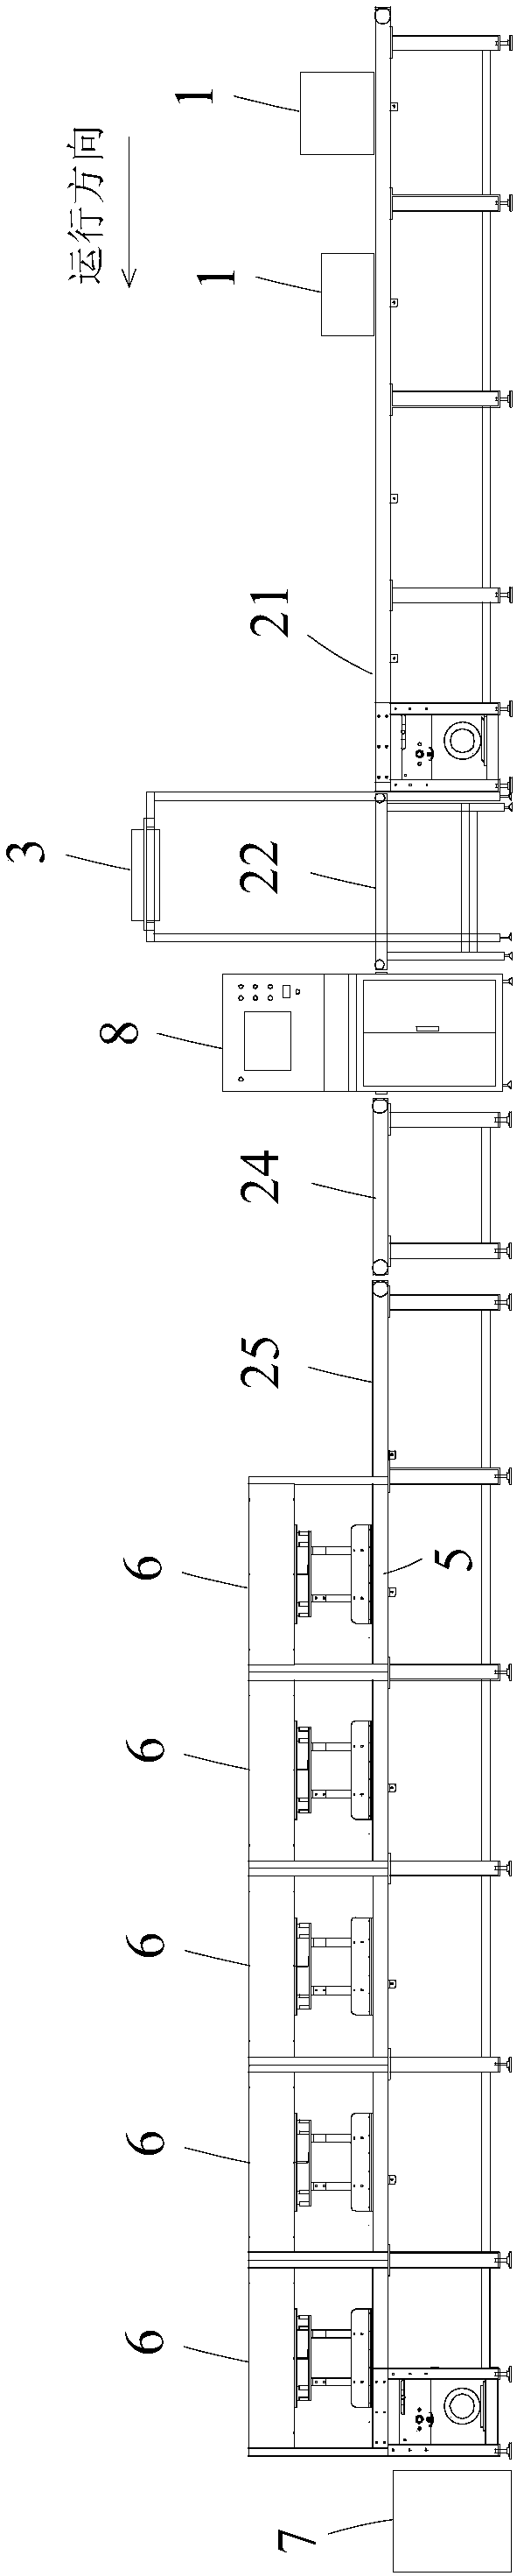 Logistics automatic sorting system and method